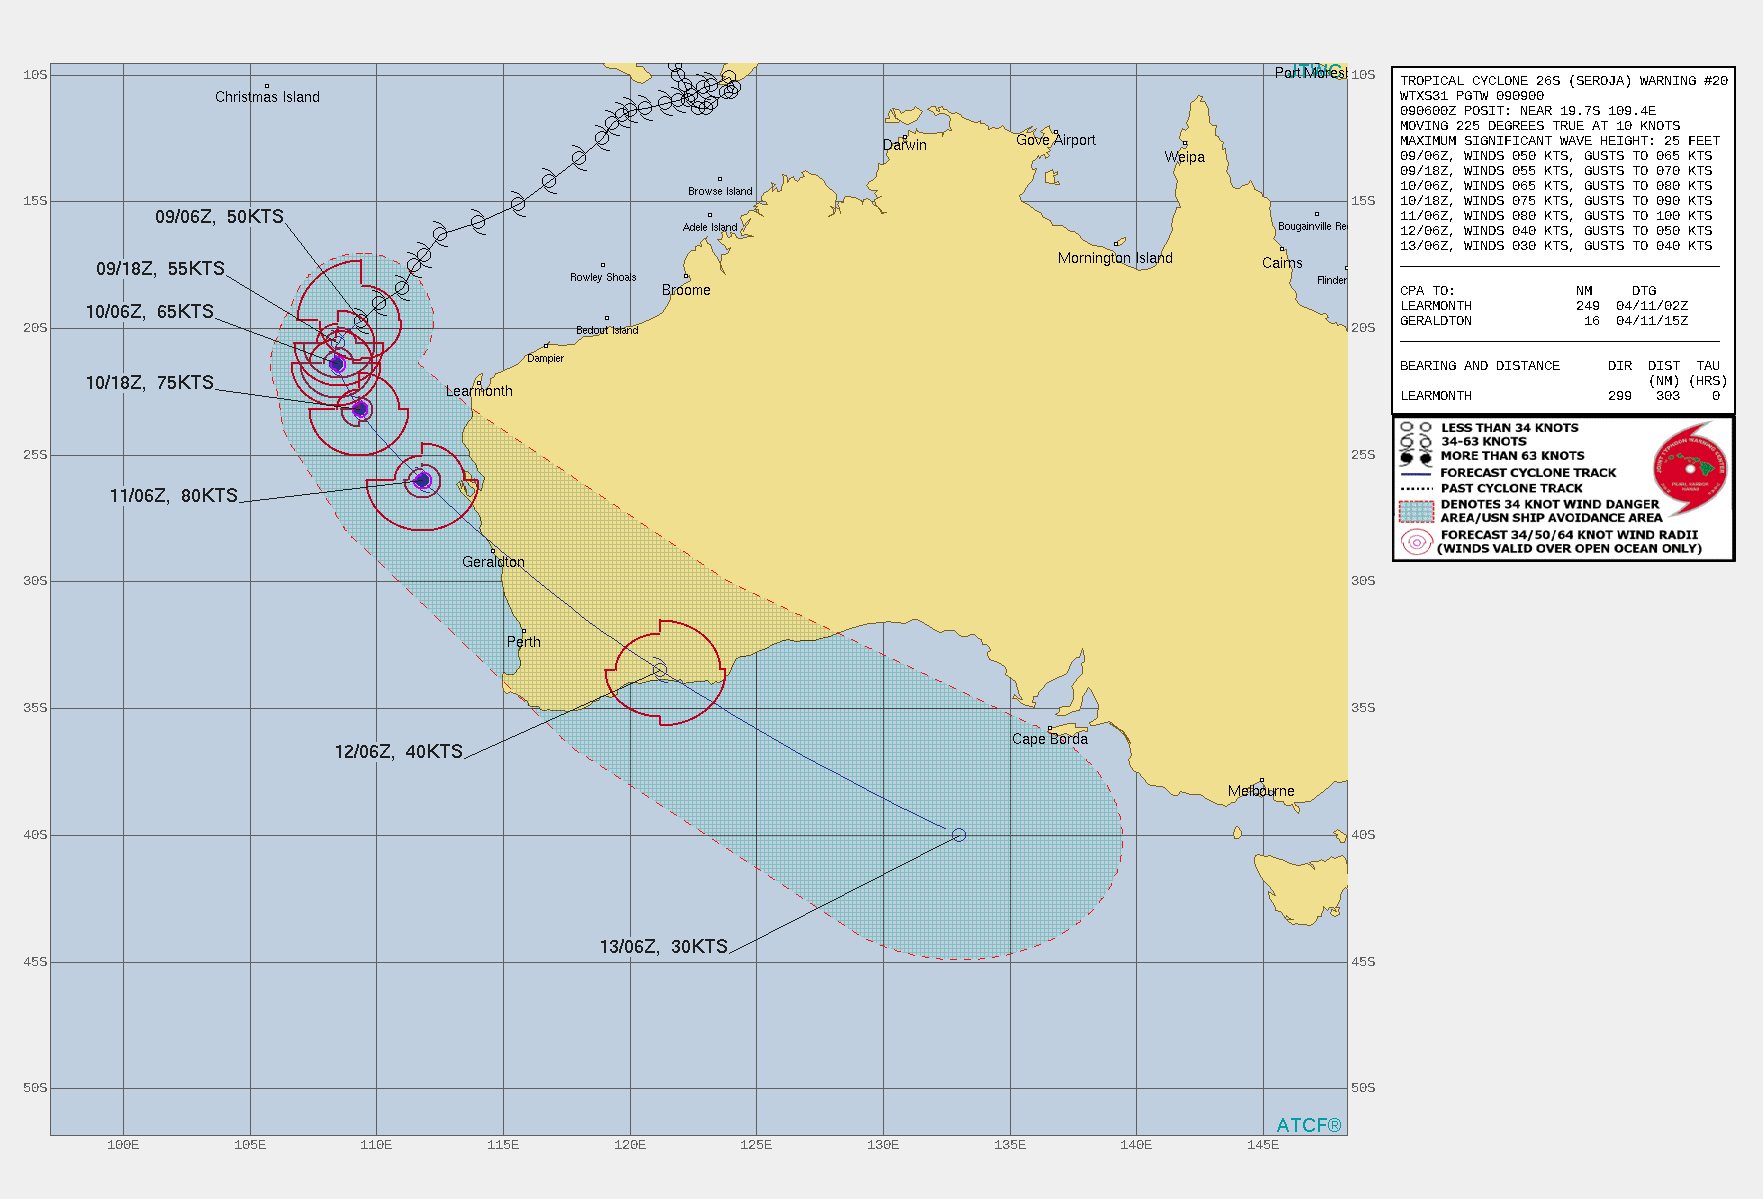 26S(SEROJA). WARNING 20 ISSUED AT 09/09UTC.THE ENVIRONMENT REMAINS FAVORABLE, WITH LOW TO MODERATE (10-15KTS) VERTICAL WIND SHEAR AND  DECENT RADIAL OUTFLOW FROM A POINT SOURCE ALOFT. TC26S (SEROJA) AND  TC 27S (ODETTE) ARE NOW INTERACTING AS THEY ARE ONLY SEPARATED BY AN  ESTIMATED 540KM. ODETTE REMAINS THE SMALLER CYCLONE OF THE TWO AND  IS NOT EXPECTED TO PREVENT SEROJA FROM INTENSIFYING AS ODETTE IS NOW  DECOUPLING FROM THE UPPER LEVEL OUTFLOW. THE PRESENCE OF TC 27S HAS  CAUSED SOME SLIGHT DISRUPTION AND PULLED SEROJA SLIGHTLY TO THE  NORTH OF ITS ORIGINAL TRACK. HOWEVER, A PERIOD OF SWIFT  INTENSIFICATION REMAINS EXPECTED BETWEEN NOW AND 36 HOURS ONCE  SEROJA COMPLETES FORMATION OF AN INNER CORE AND ROUNDS THE RIDGE  AXIS TO THE WEST. A LEVELING OFF OF INTENSITY PRIOR TO LANDFALL IN  WESTERN AUSTRALIA IS EXPECTED DUE TO INCREASING VERTICAL SHEAR TO 20- 25 KNOTS AS THE CYCLONE APPROACHES THE JET STREAM, AS WELL AS POSSIBLE  ENTRAINMENT OF MID-LATITUDE DRY AIR. THE FORECAST SHOWS THE PEAK  INTENSITY BACKING OFF AND IS LOWERED TO 80 KNOTS/US CAT1 AT 48 HOURS, THOUGH  SINCE LANDFALL OCCURS BETWEEN THE 48 AND 72 HOUR FORECAST POINTS,  THE PEAK INTENSITY PRIOR TO LANDFALL COULD BE HIGHER. THE TRACK  FORECAST PHILOSOPHY REMAINS UNCHANGED, WITH A SLOWING OF FORWARD  MOTION EXPECTED THROUGH 24 HOURS DUE TO INTERACTION WITH TC ODETTE,  BEFORE ACCELERATING SOUTHEASTWARD ALONG THE FLANK OF THE DEEP-LAYER  RIDGE OVER WESTERN AUSTRALIA. THIS FORECAST IS SLIGHTLY FASTER THAN  THE PREVIOUS ONE THROUGH THE NEXT 12 HOURS DUE TO SEROJA'S SHORT  TERM MOTION, AND SHIFTED SLIGHTLY SOUTHWEST BEYOND 24 HOURS,  FOLLOWING THE TREND IN THE MODEL GUIDANCE. THE EXACT TIMING OF  LANDFALL NEAR GERALDTON, AUSTRALIA BETWEEN 48 AND 72 HOURS HAS ABOVE- AVERAGE UNCERTAINTY DUE TO MODEL SPREAD IN THE SLOW DOWN CAUSED BY  INTERACTION WITH TC ODETTE PRIOR TO MAKING ITS SOUTHEASTWARD MOVE  TOWARD THE COAST.